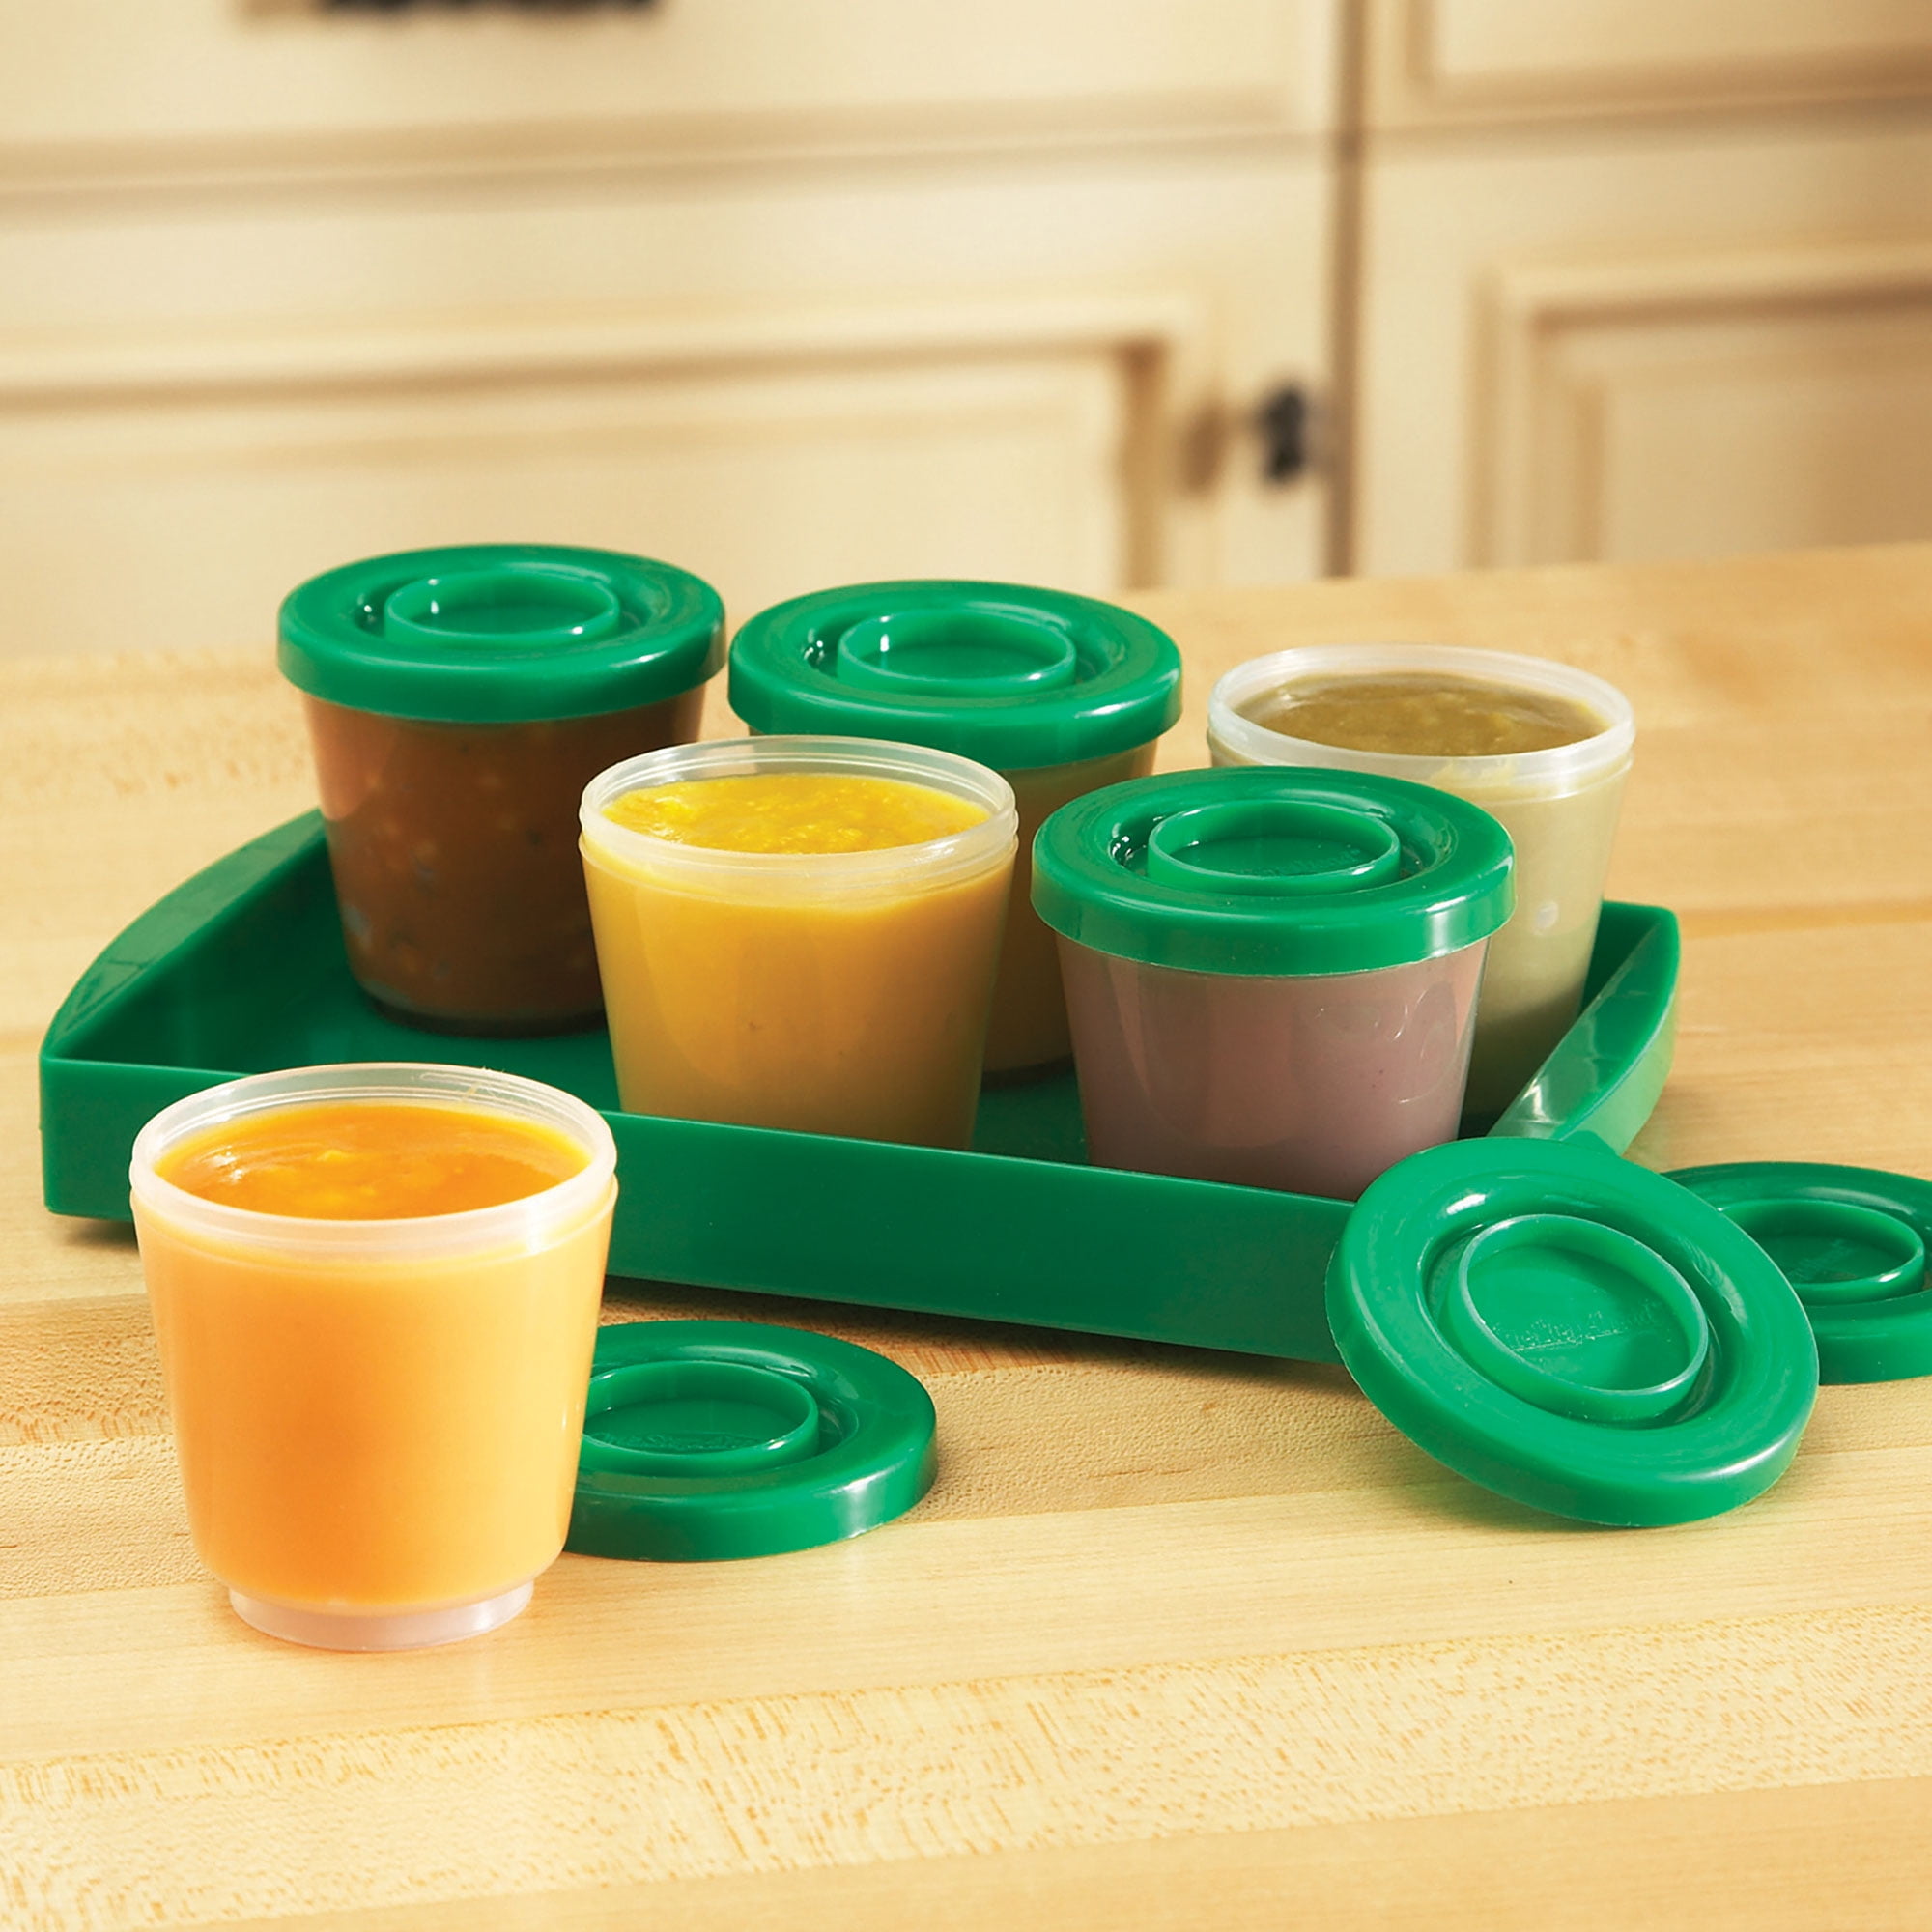 Supermama Baby Food Containers - 7 oz(6 Pack), Reusable Baby Food